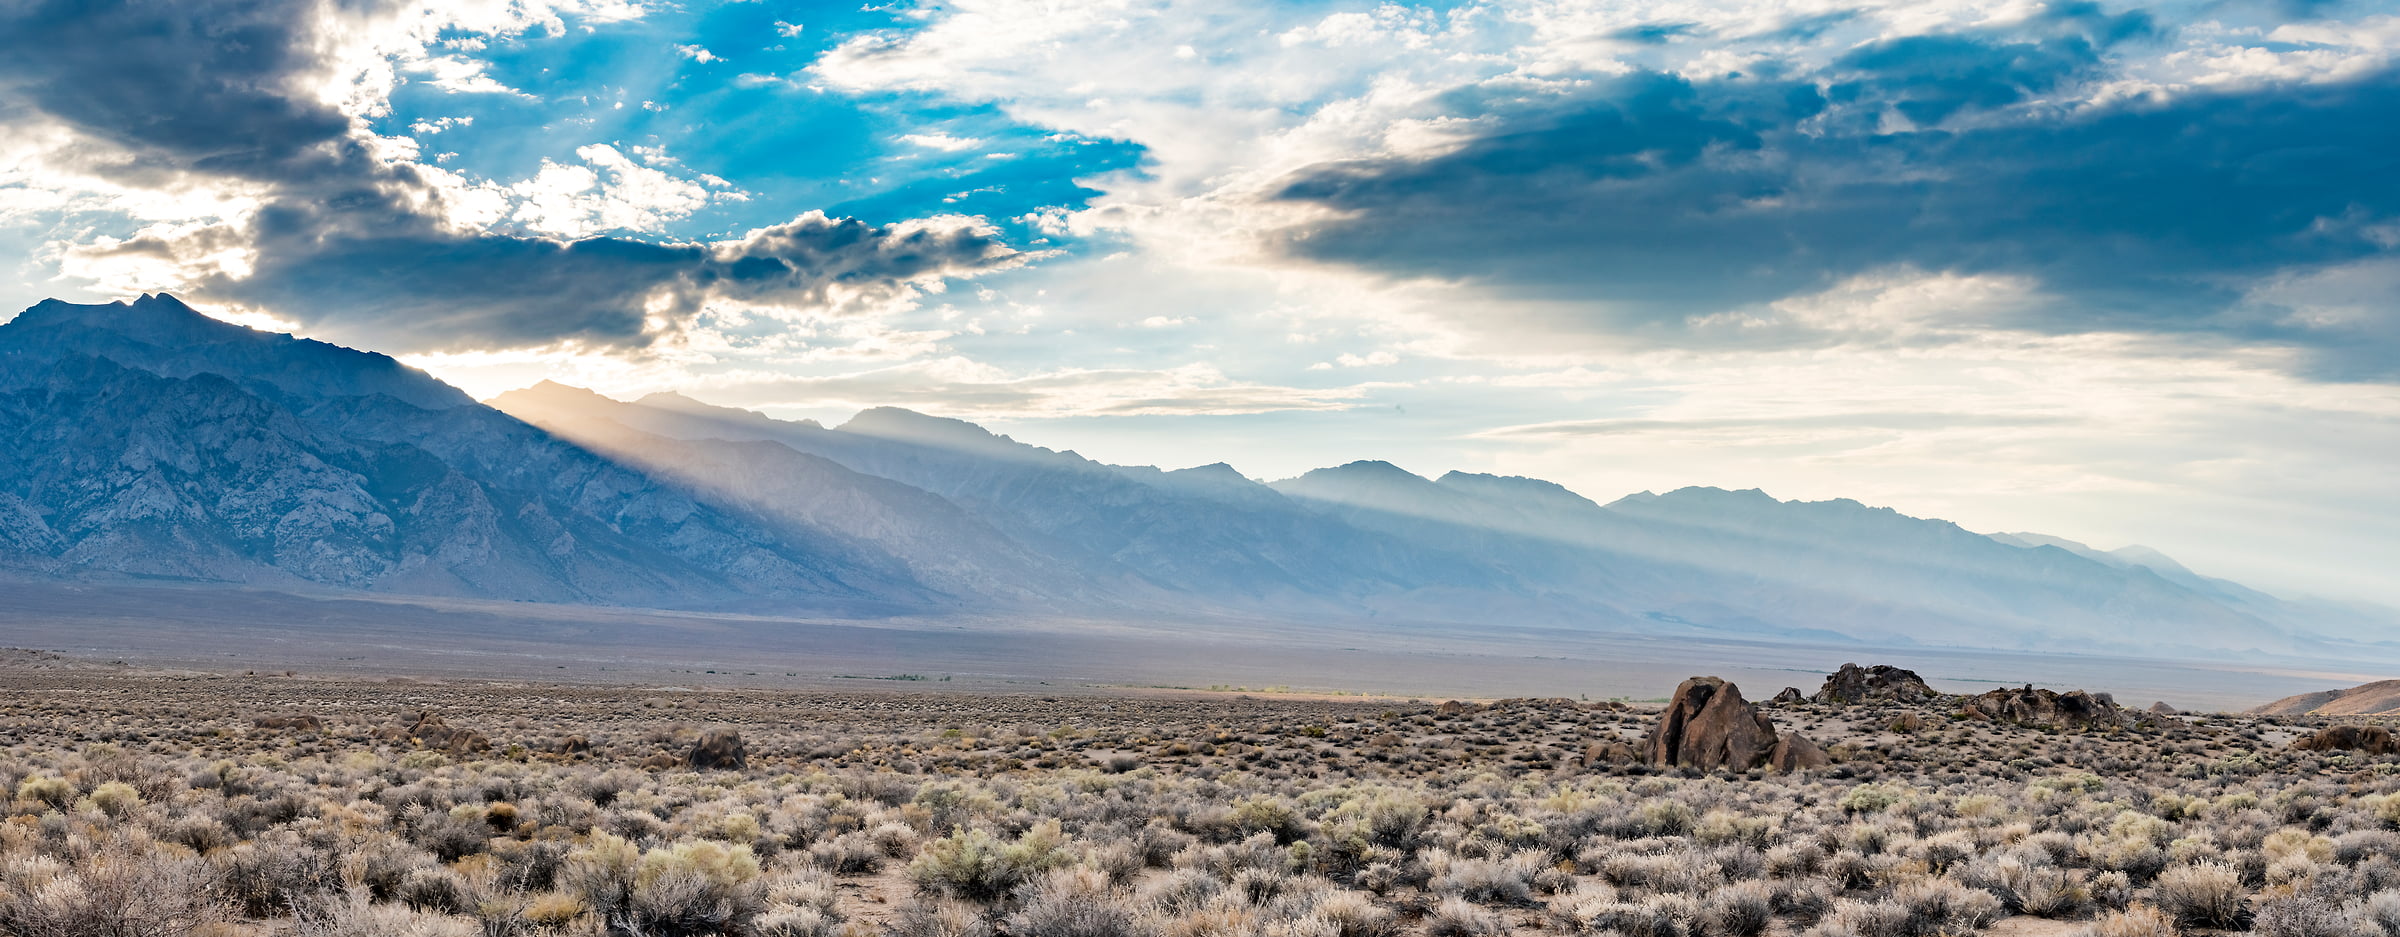 125 megapixels! A very high resolution, large-format VAST photo print of the eastern sierra nevada mountains and Alabama Hills, Lone Pine, California; landscape photo created by Justin Katz